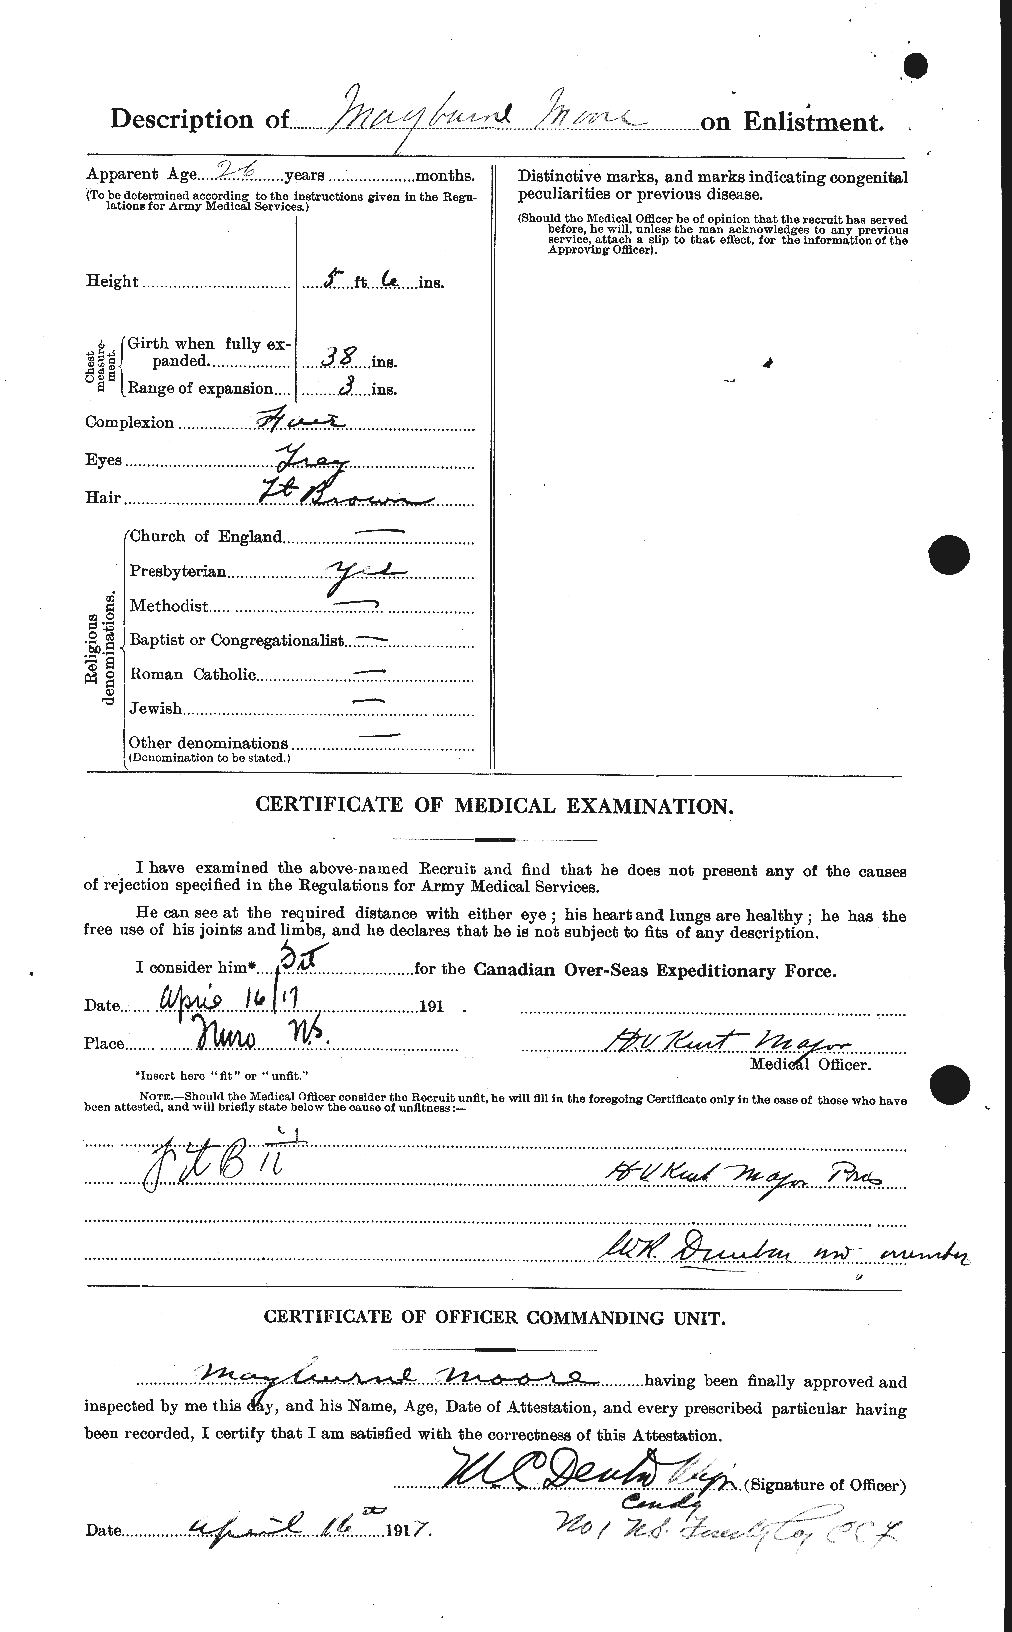 Personnel Records of the First World War - CEF 503435b